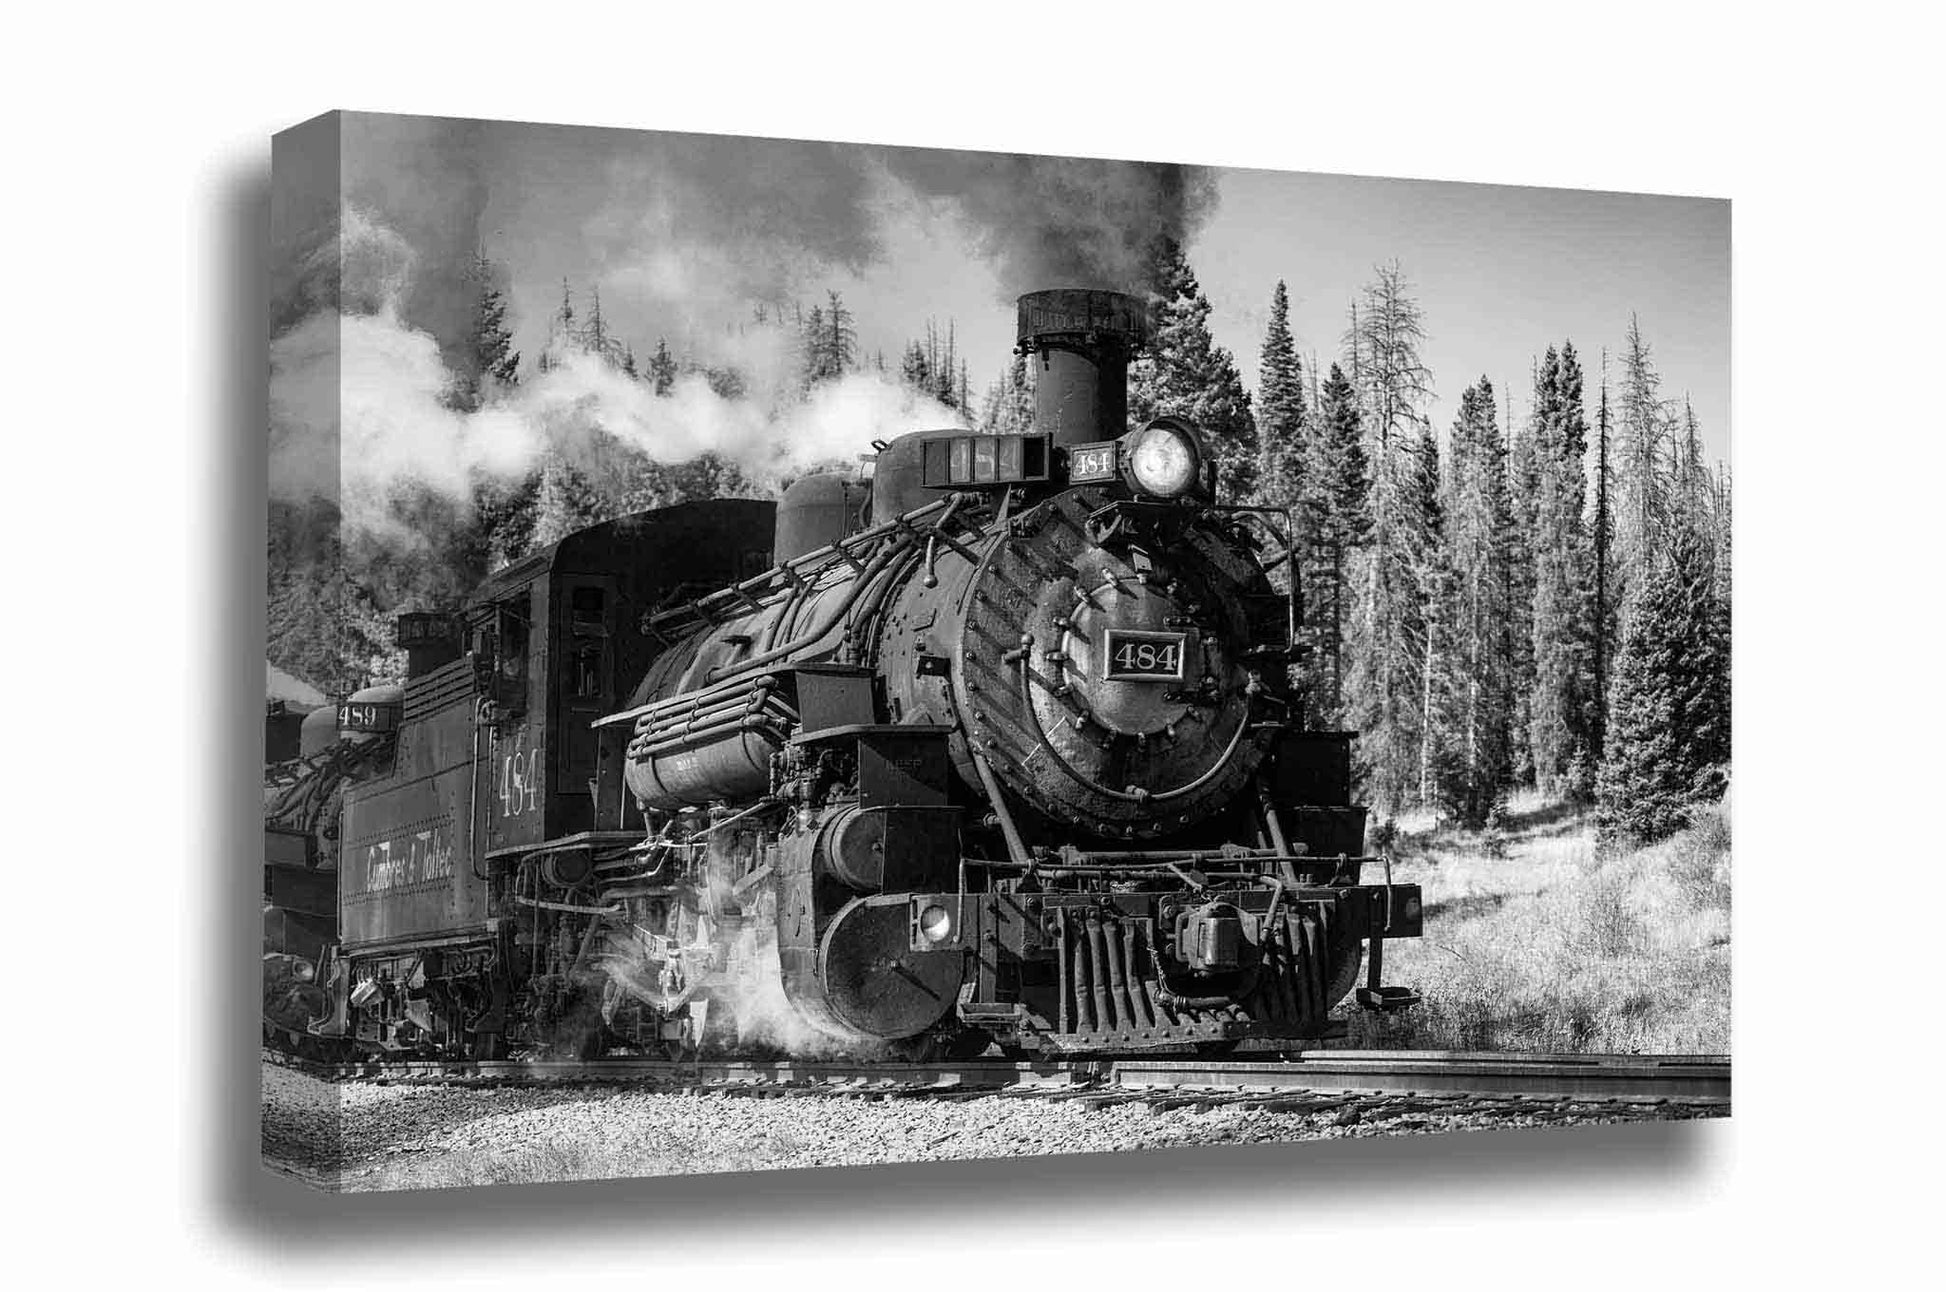 Black and White train canvas wall art of a steam engine locomotive passing through a forest on an autumn day in the Rocky Mountains of Colorado by Sean Ramsey of Southern Plains Photography.